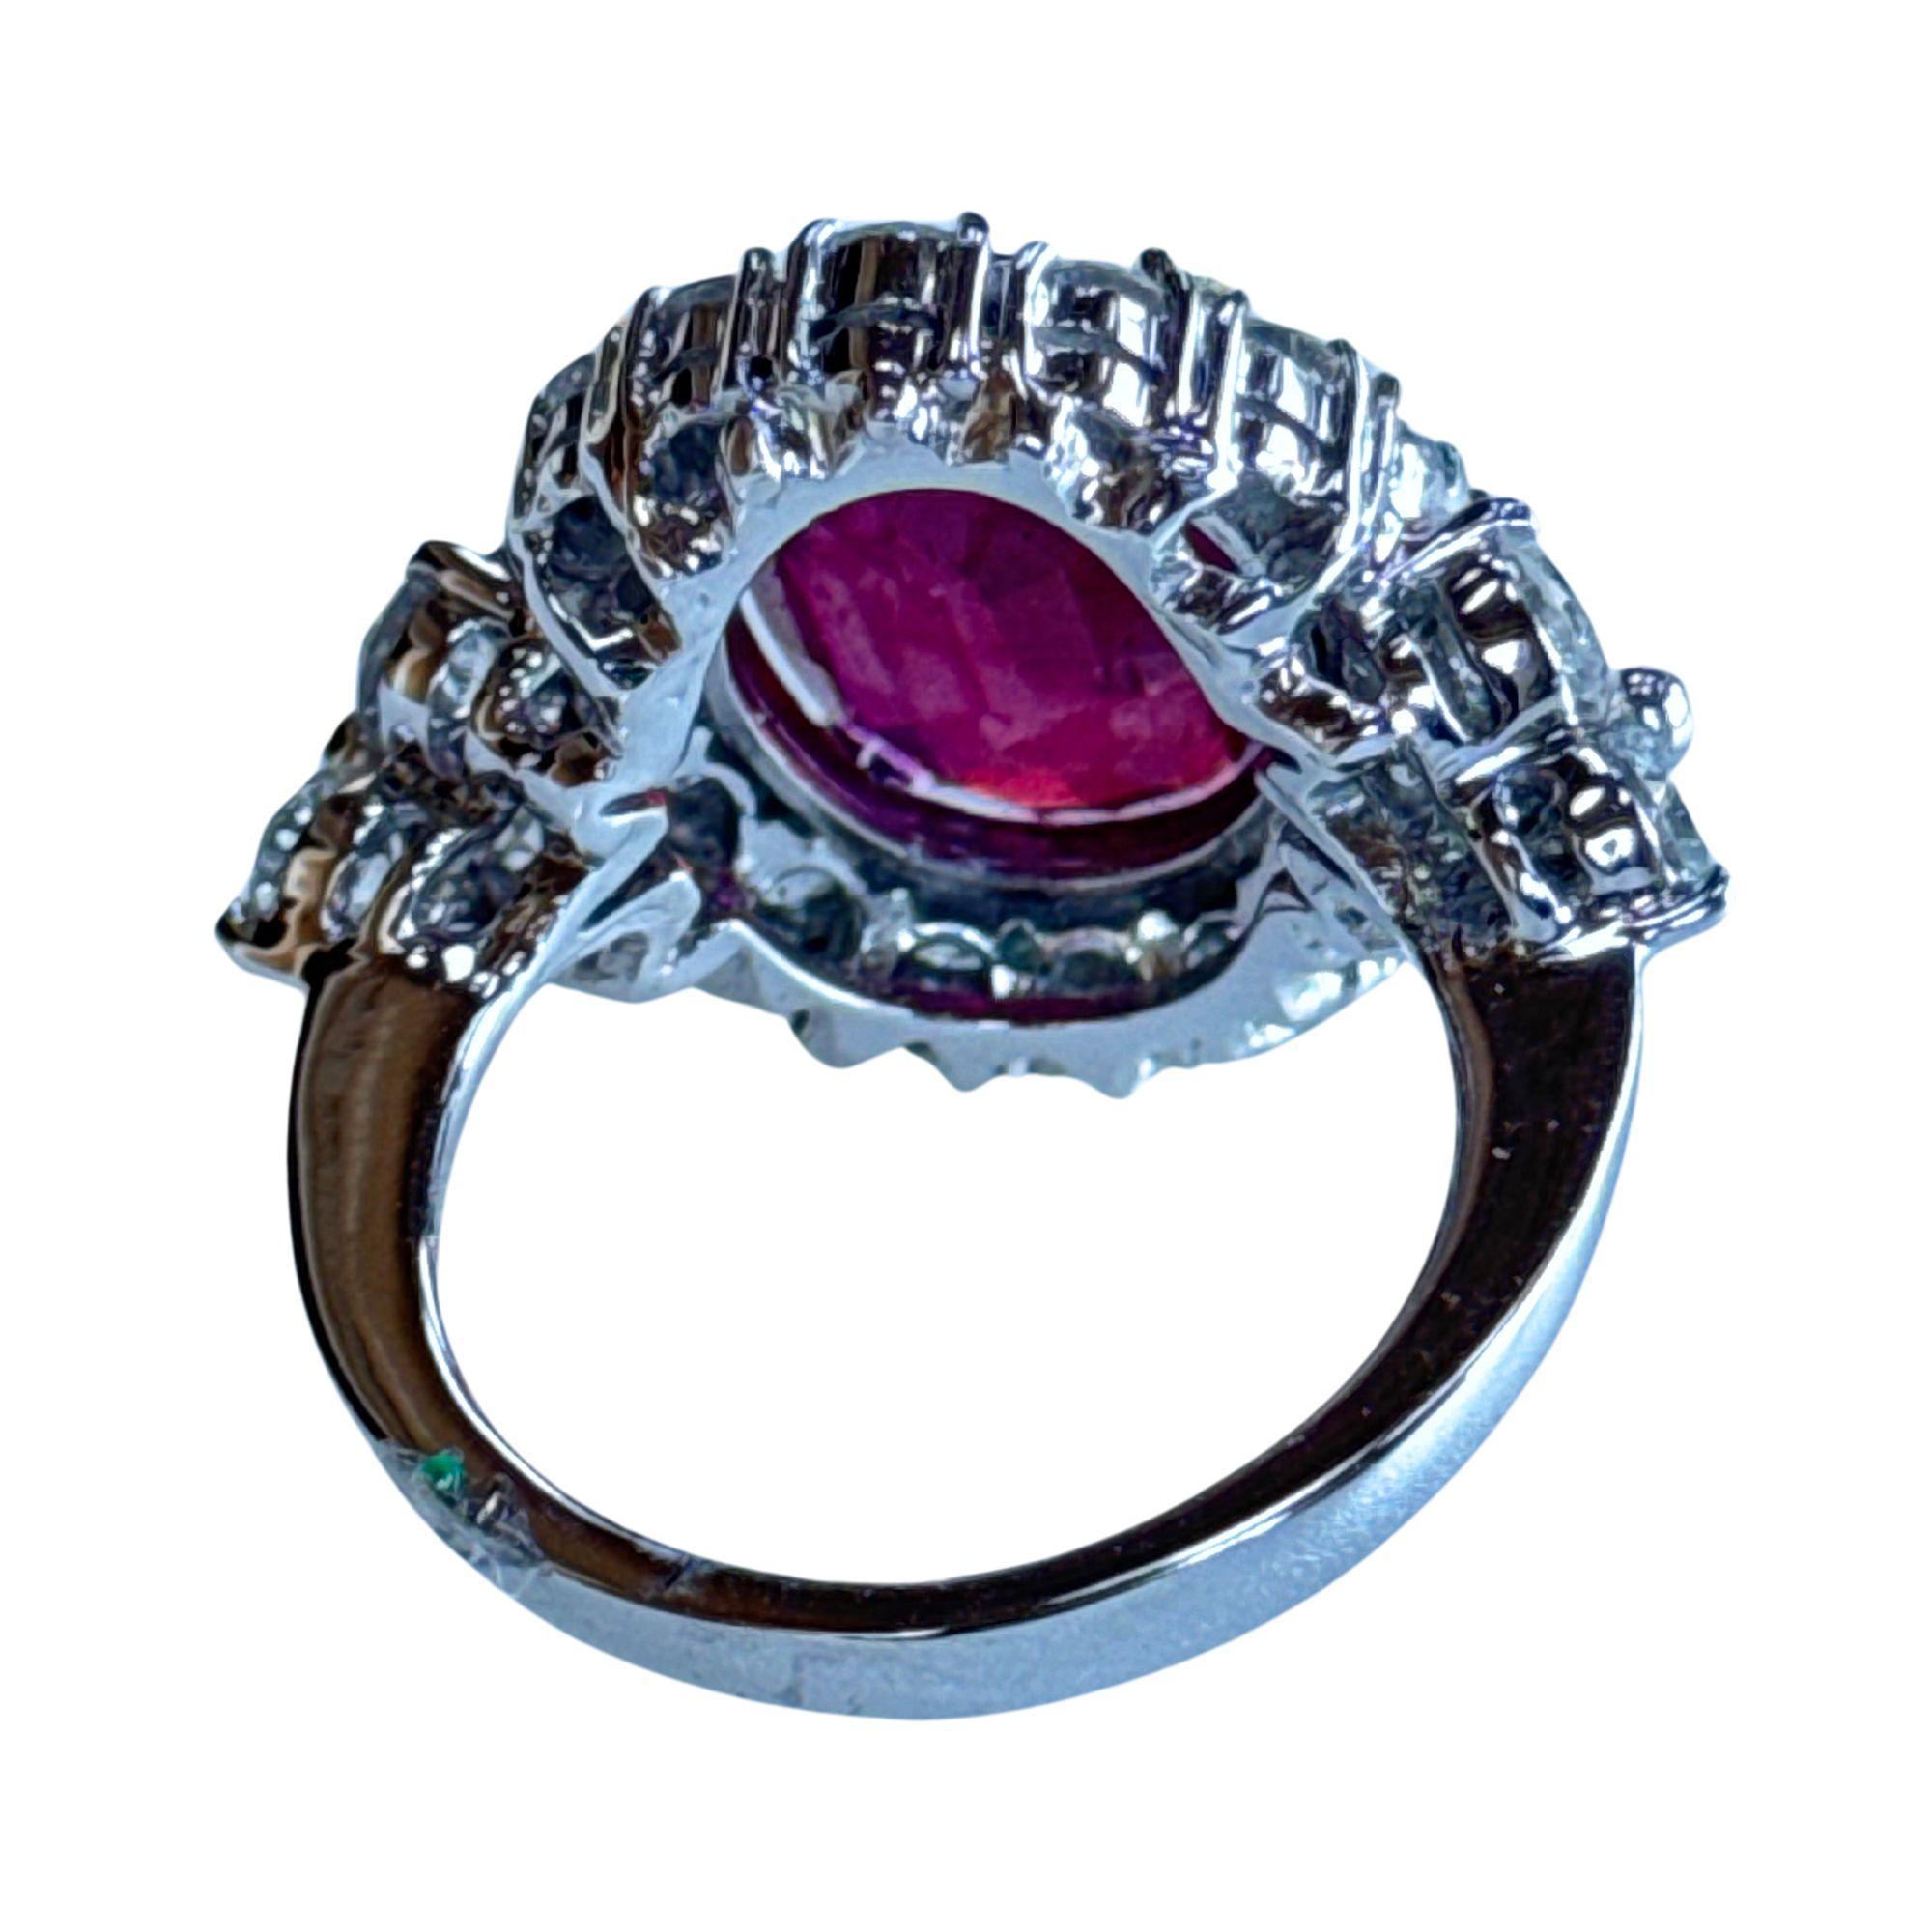 Feast your eyes on our 18k Diamond and African Ruby Ring. Crafted in 18k white gold, this ring has a striking 7.72 carat African Ruby center with dazzling 3.02 carat diamonds around it. This ring exudes elegance and sophistication. In good condition